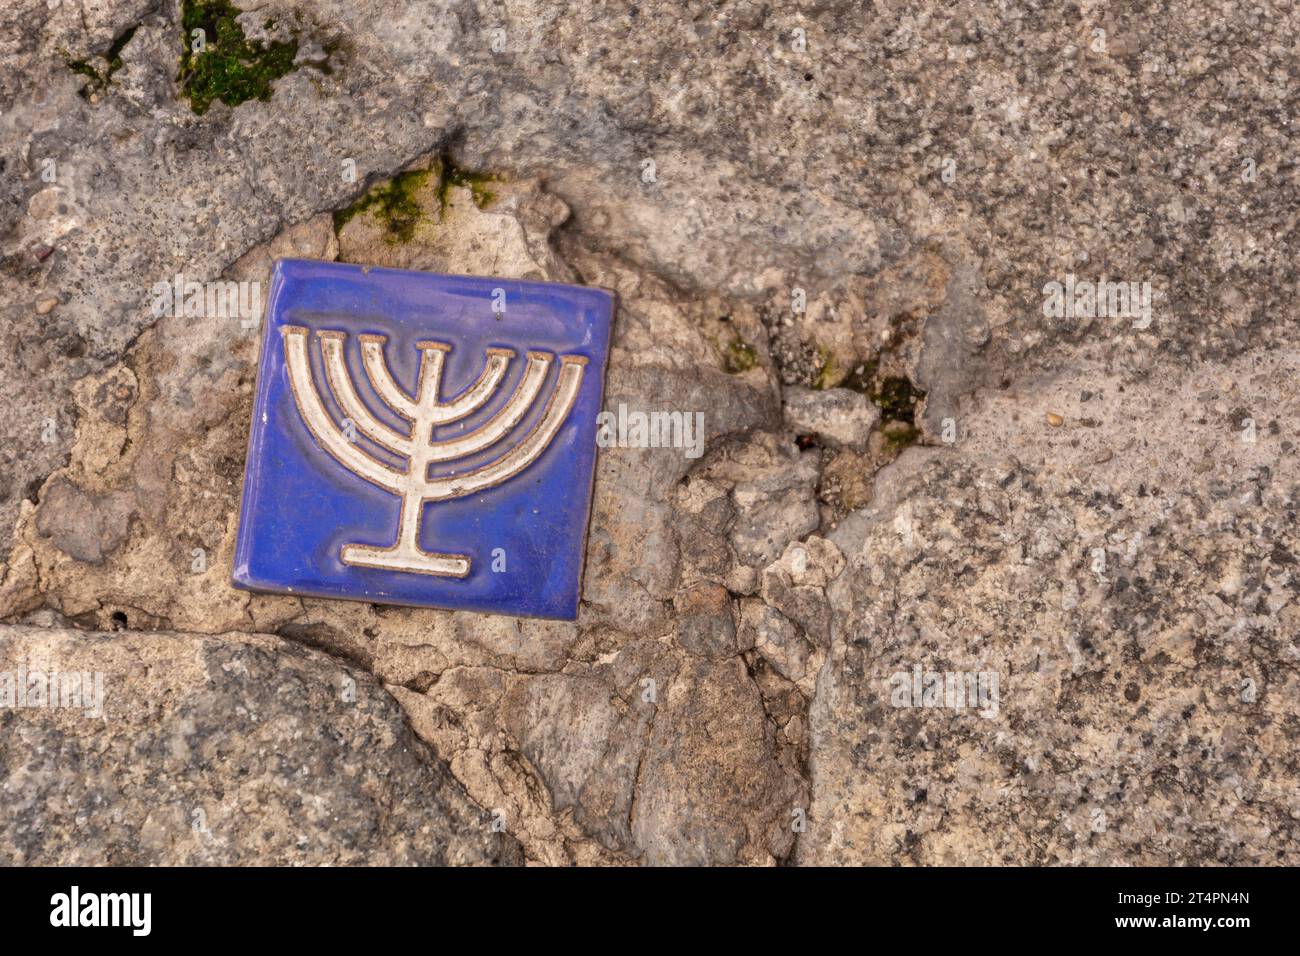 Small blue tile with menorah symbol embedded in the pavement of the former Jewish quarter, Toledo, Spain, copy space. Stock Photo